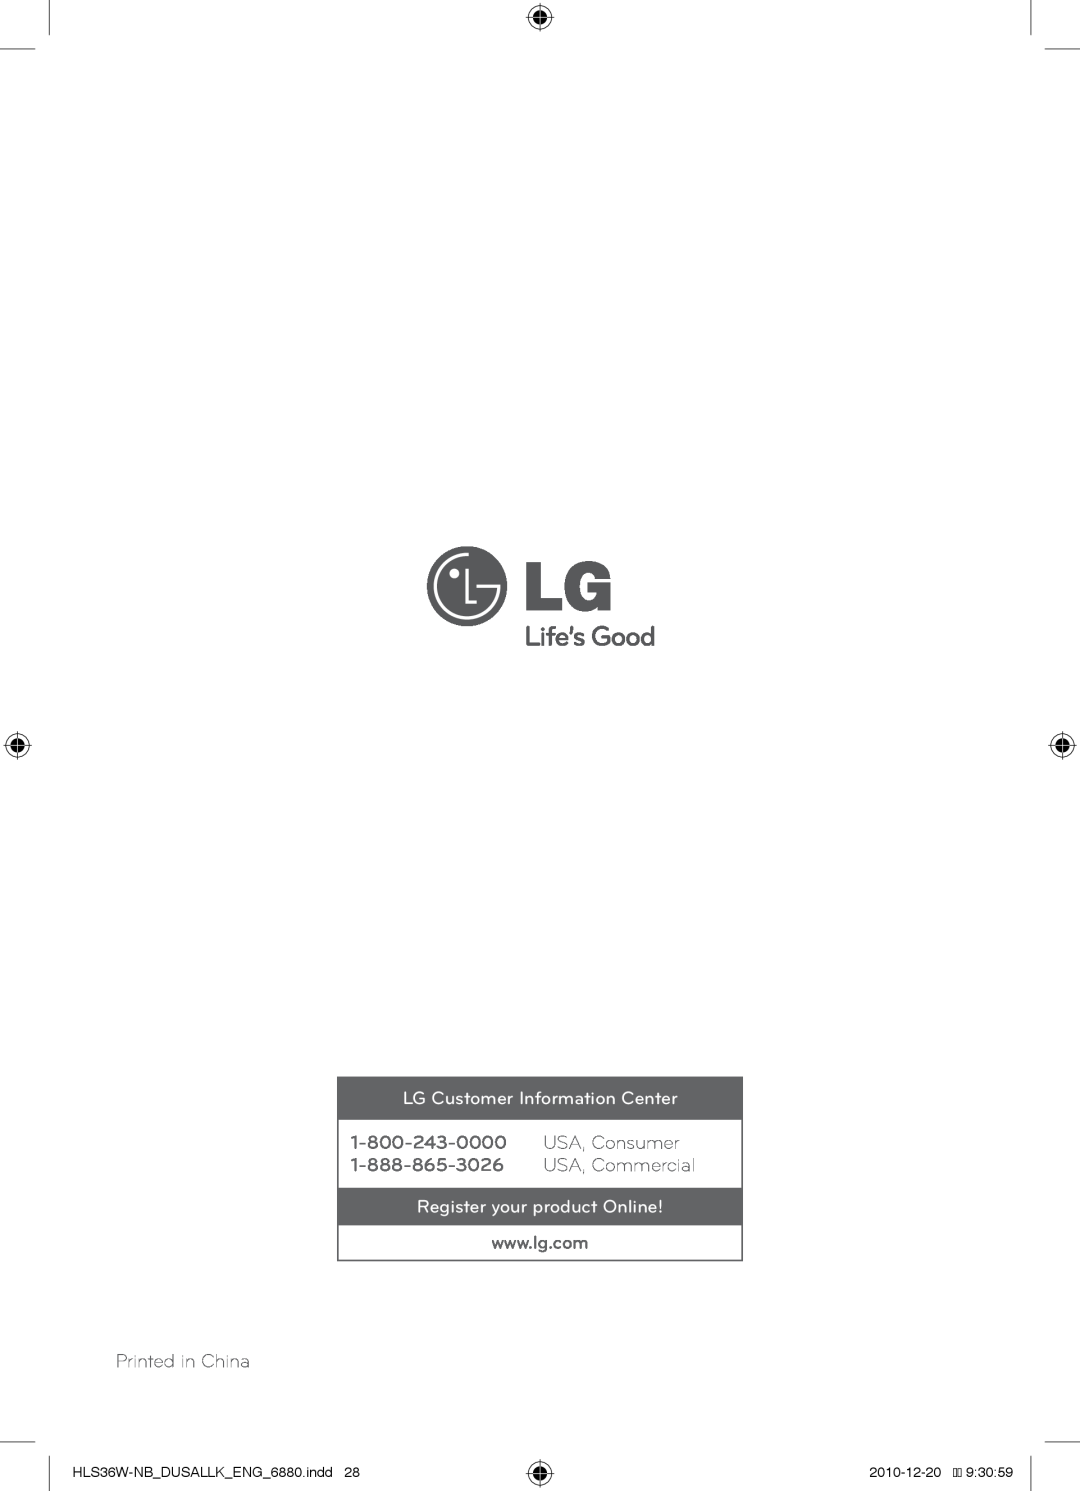 LG Electronics SHS36-D LG Customer Information Center, USA, Consumer, USA, Commercial, Register your product Online 